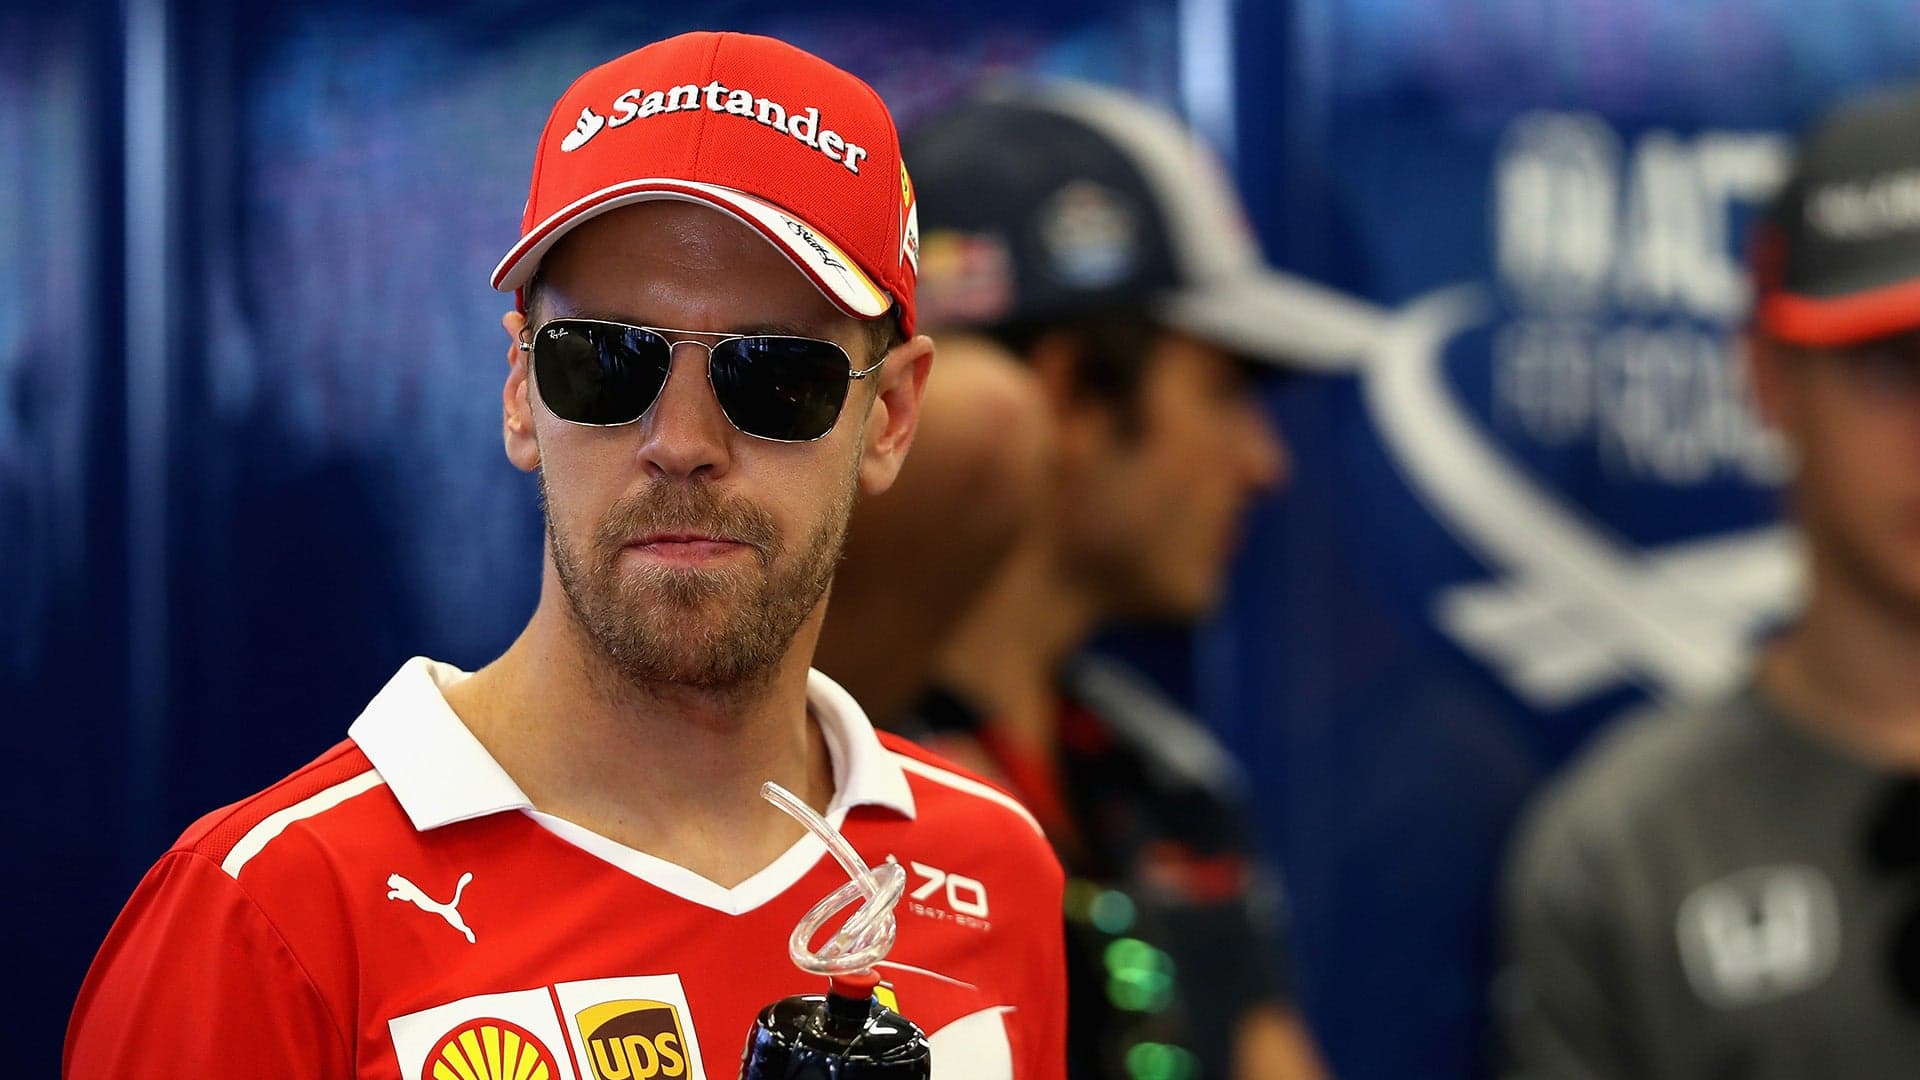 There’s ‘No Rush’ to Sign New Ferrari Contract, Vettel Says